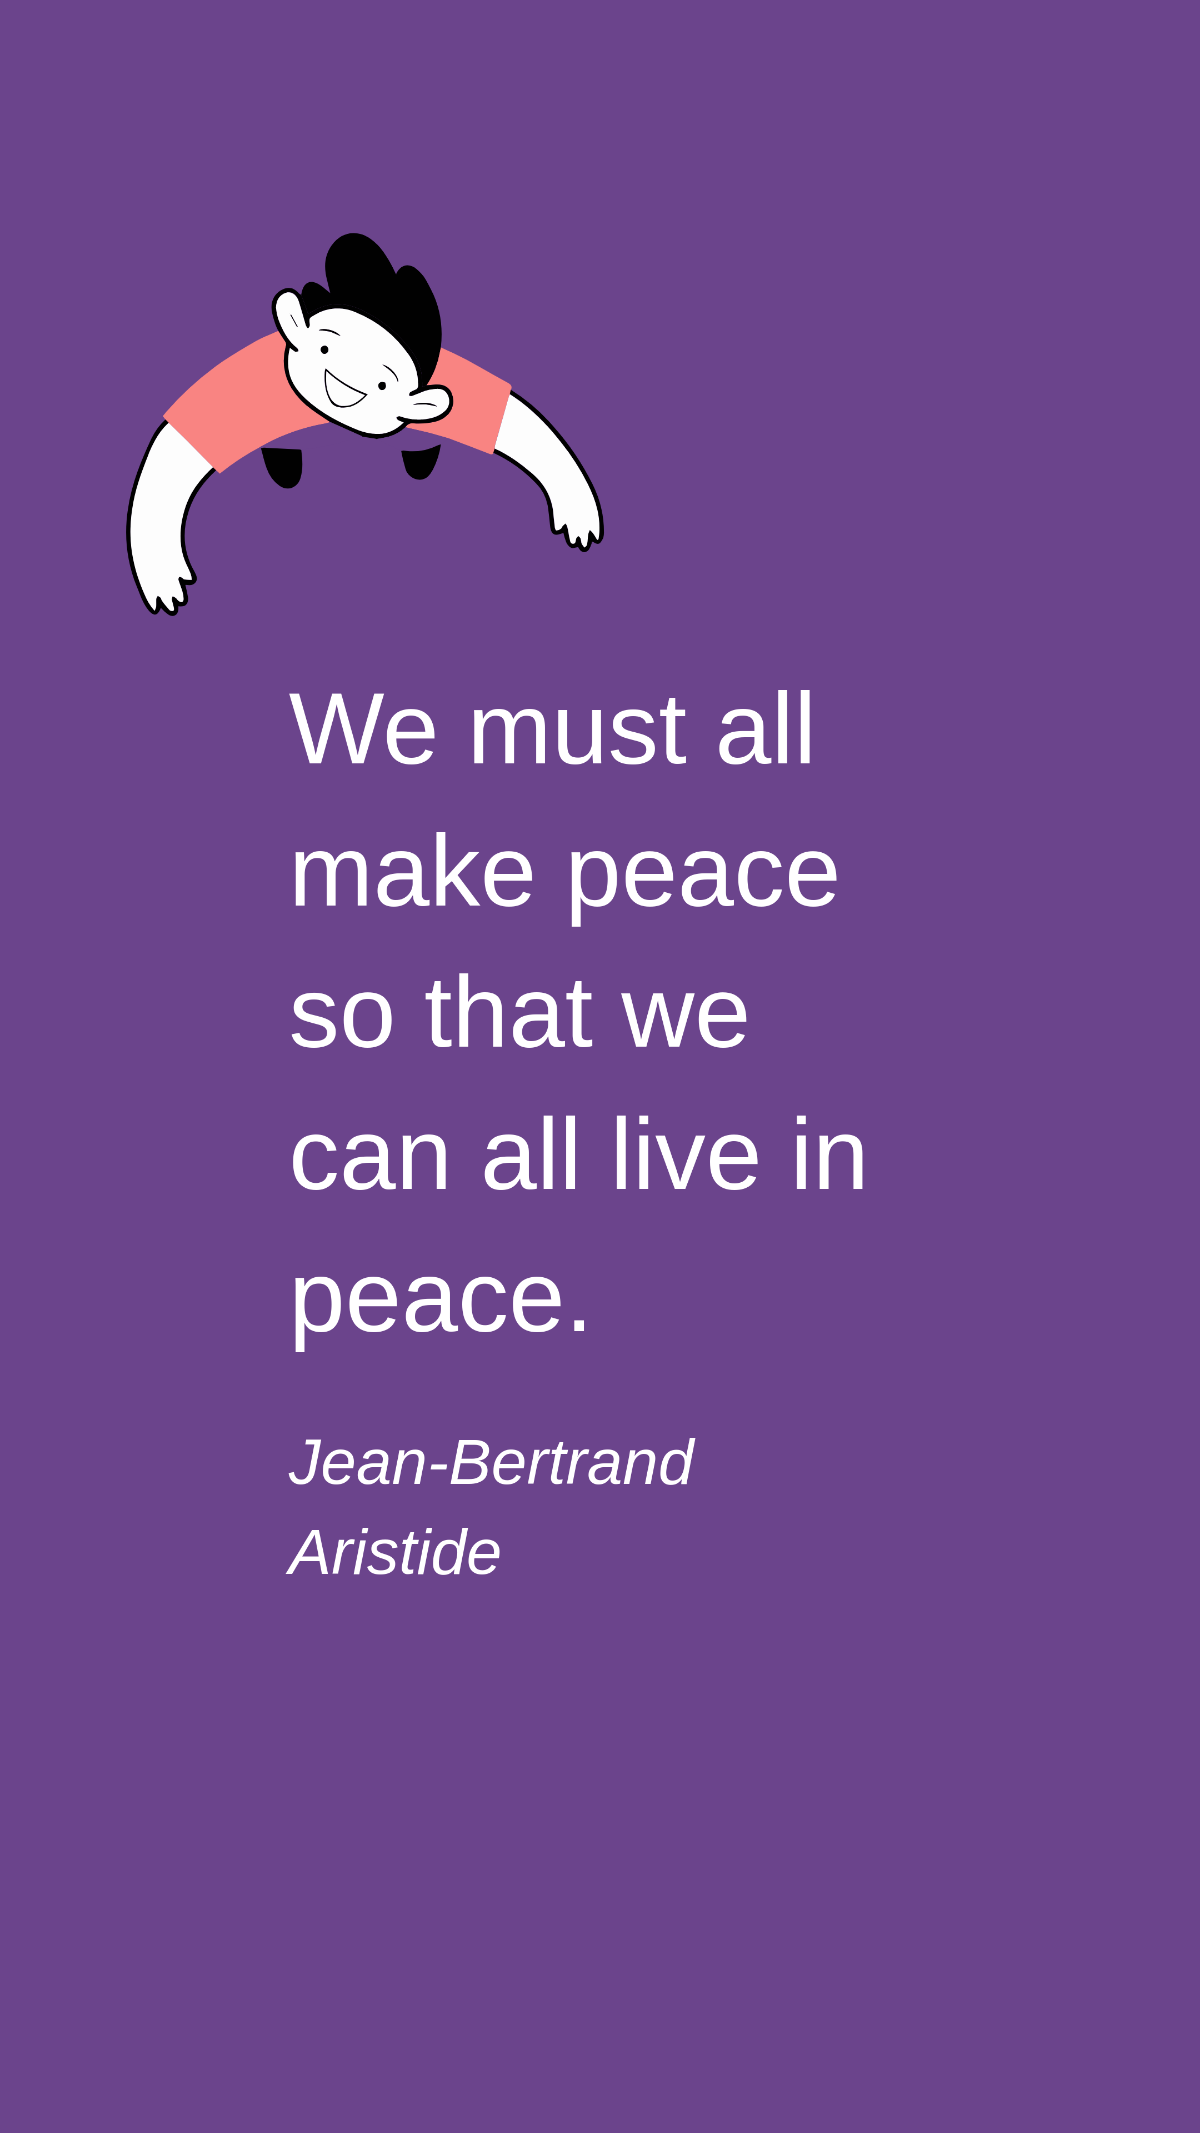 Jean-Bertrand Aristide - We must all make peace so that we can all live in peace.